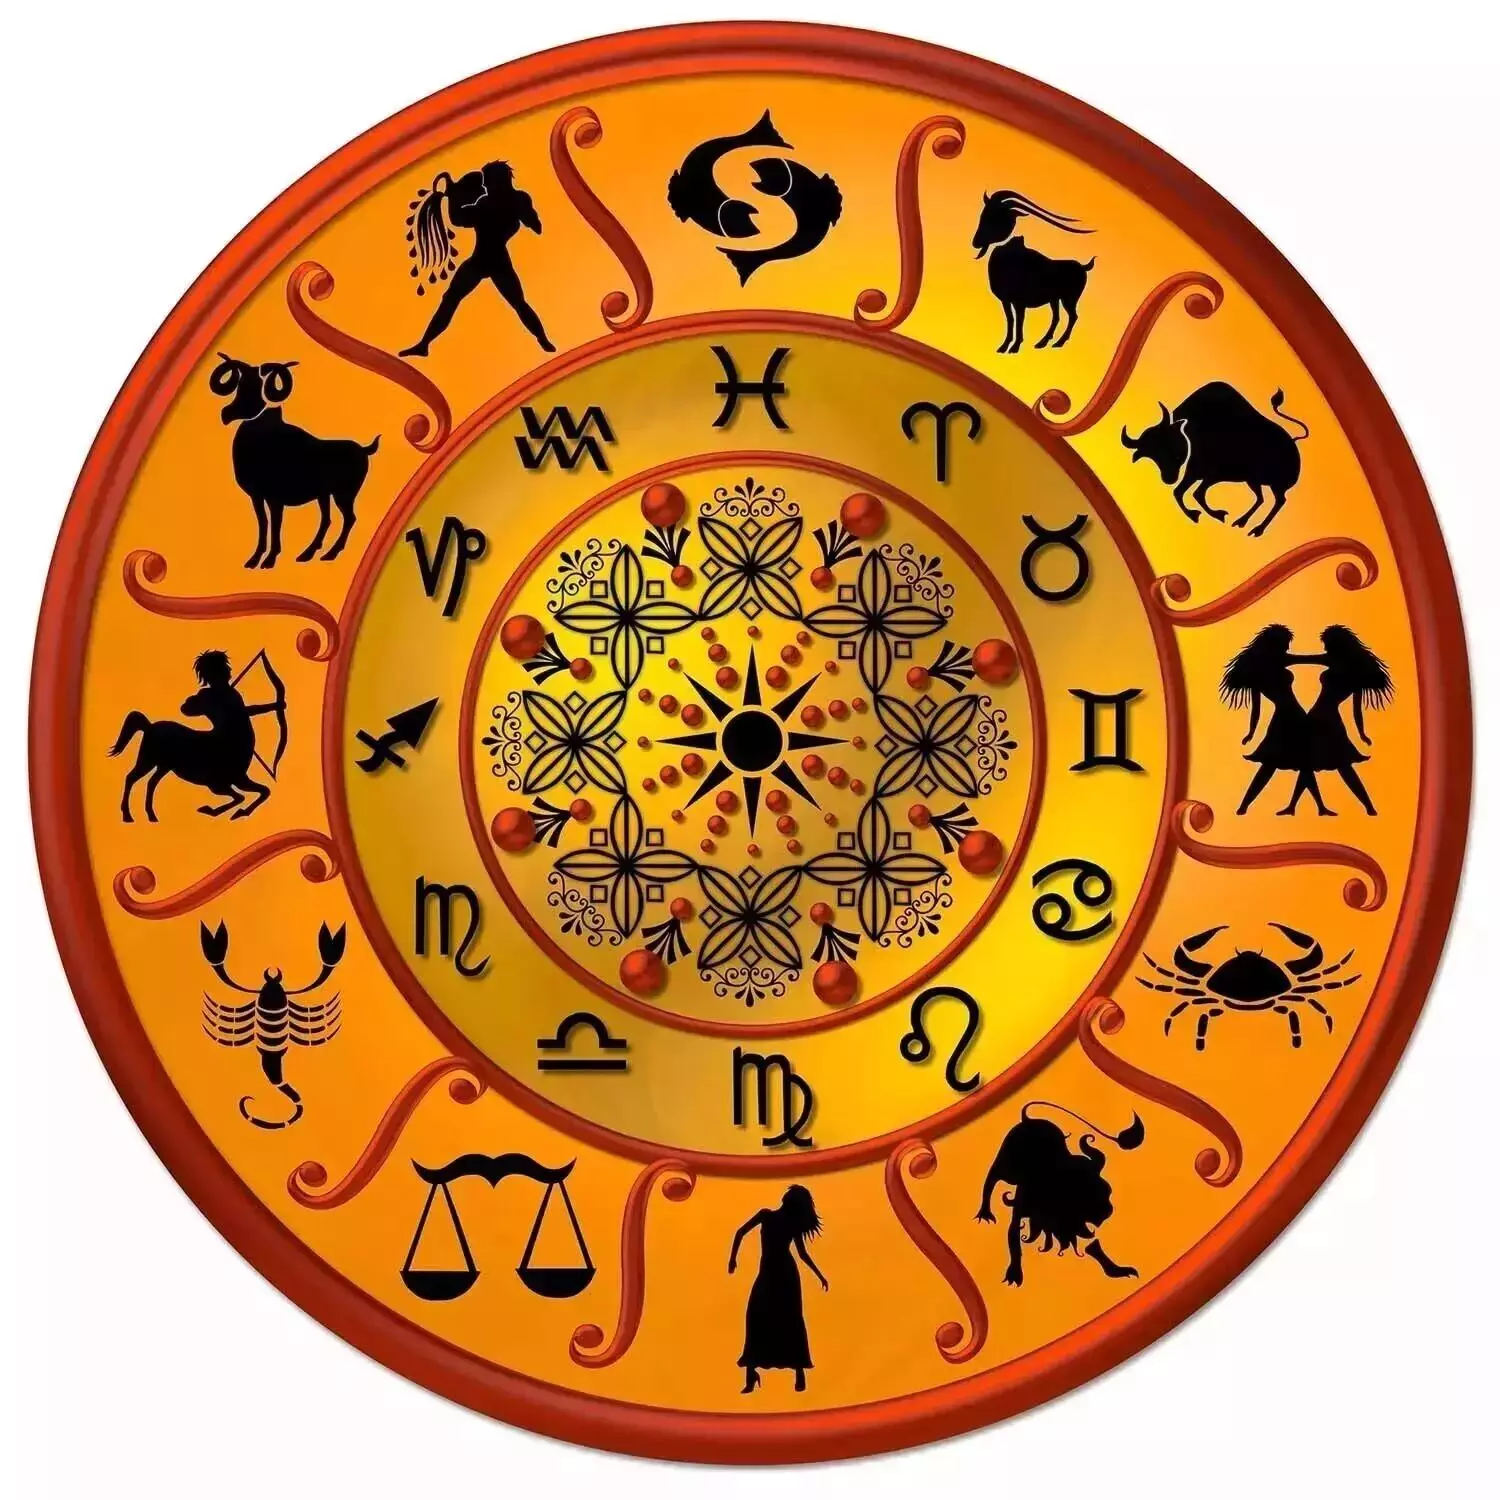 15 March  – Know your todays horoscope